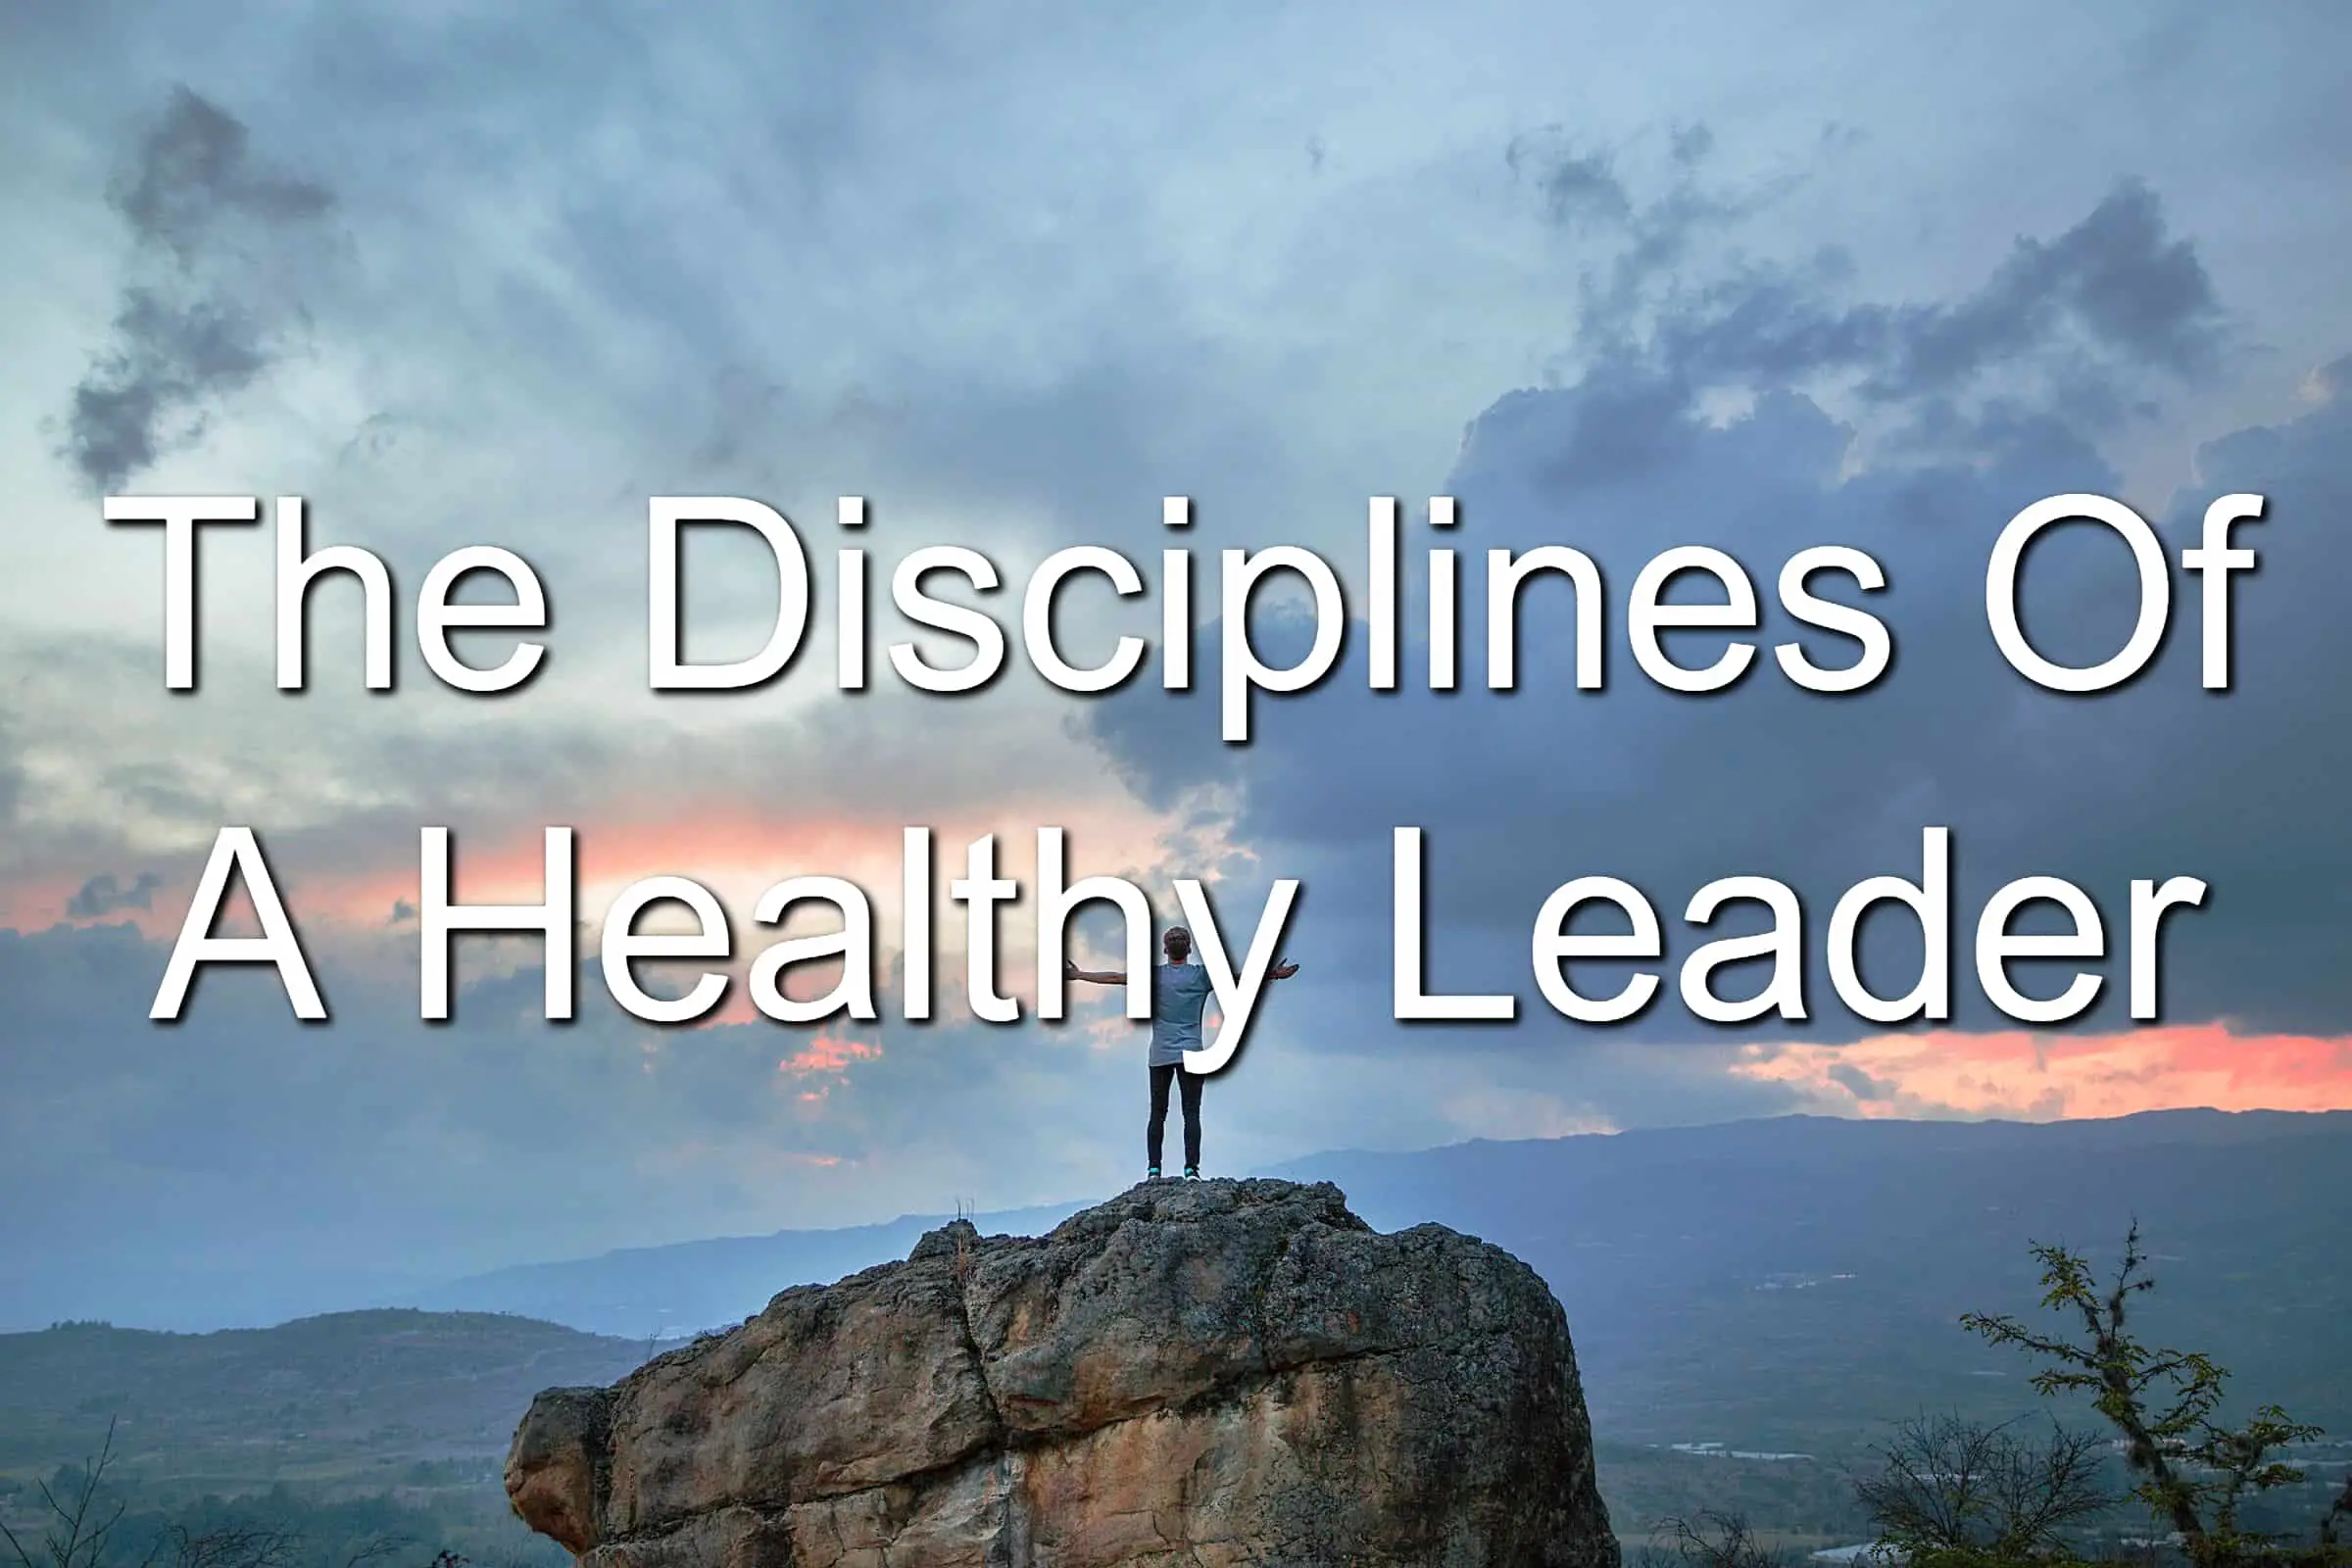 What disciplines does a healthy leader have?